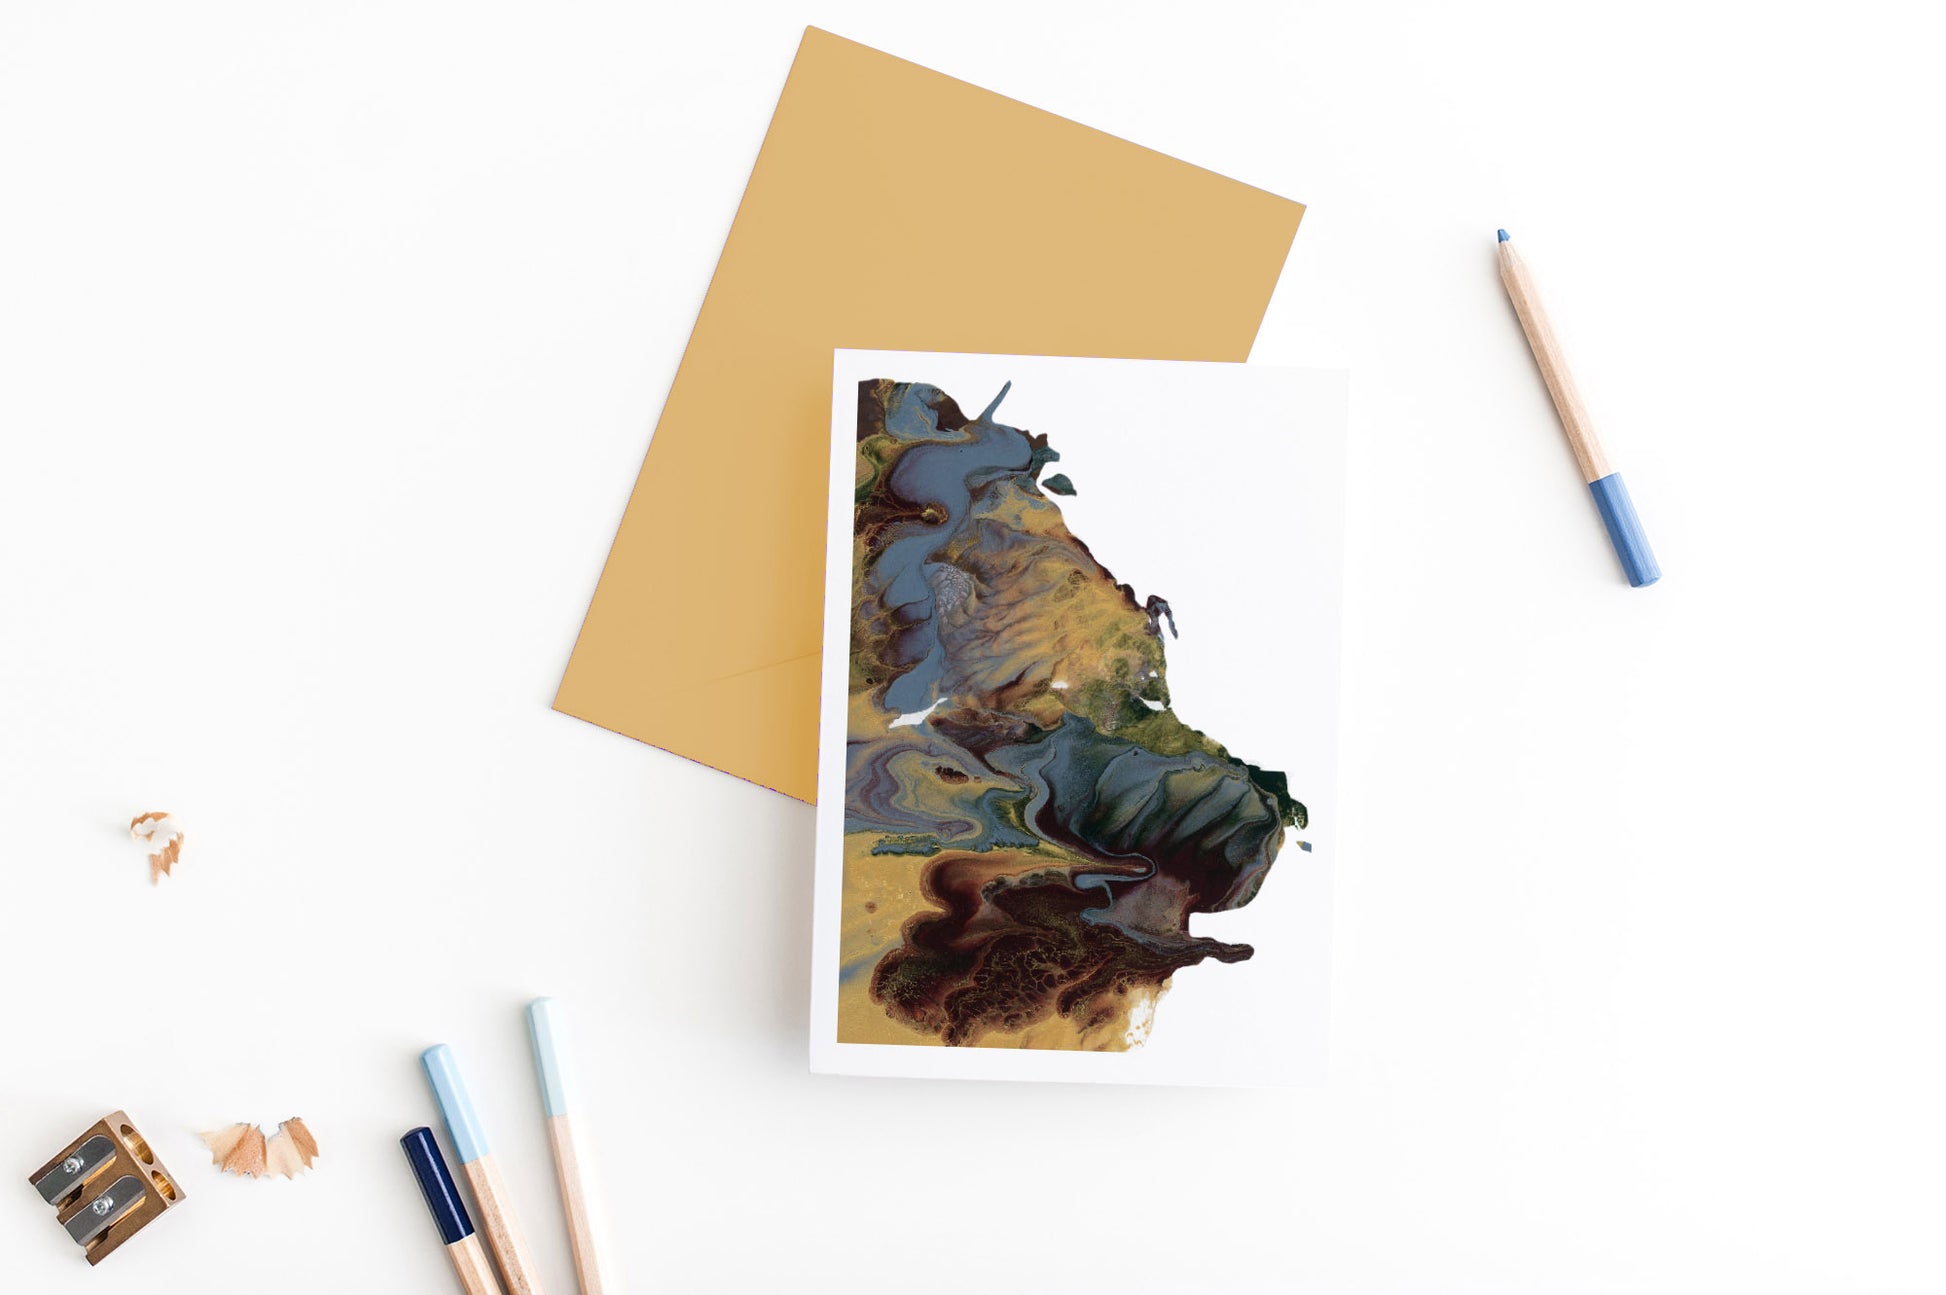 Greeting card showing an abstract painting in golds, dusty blues, and browns created from squishing acrylic paint between pieces of cardboard. It sits on a gold envelope with 4 colored pencils, a sharpener and shavings on a white background.